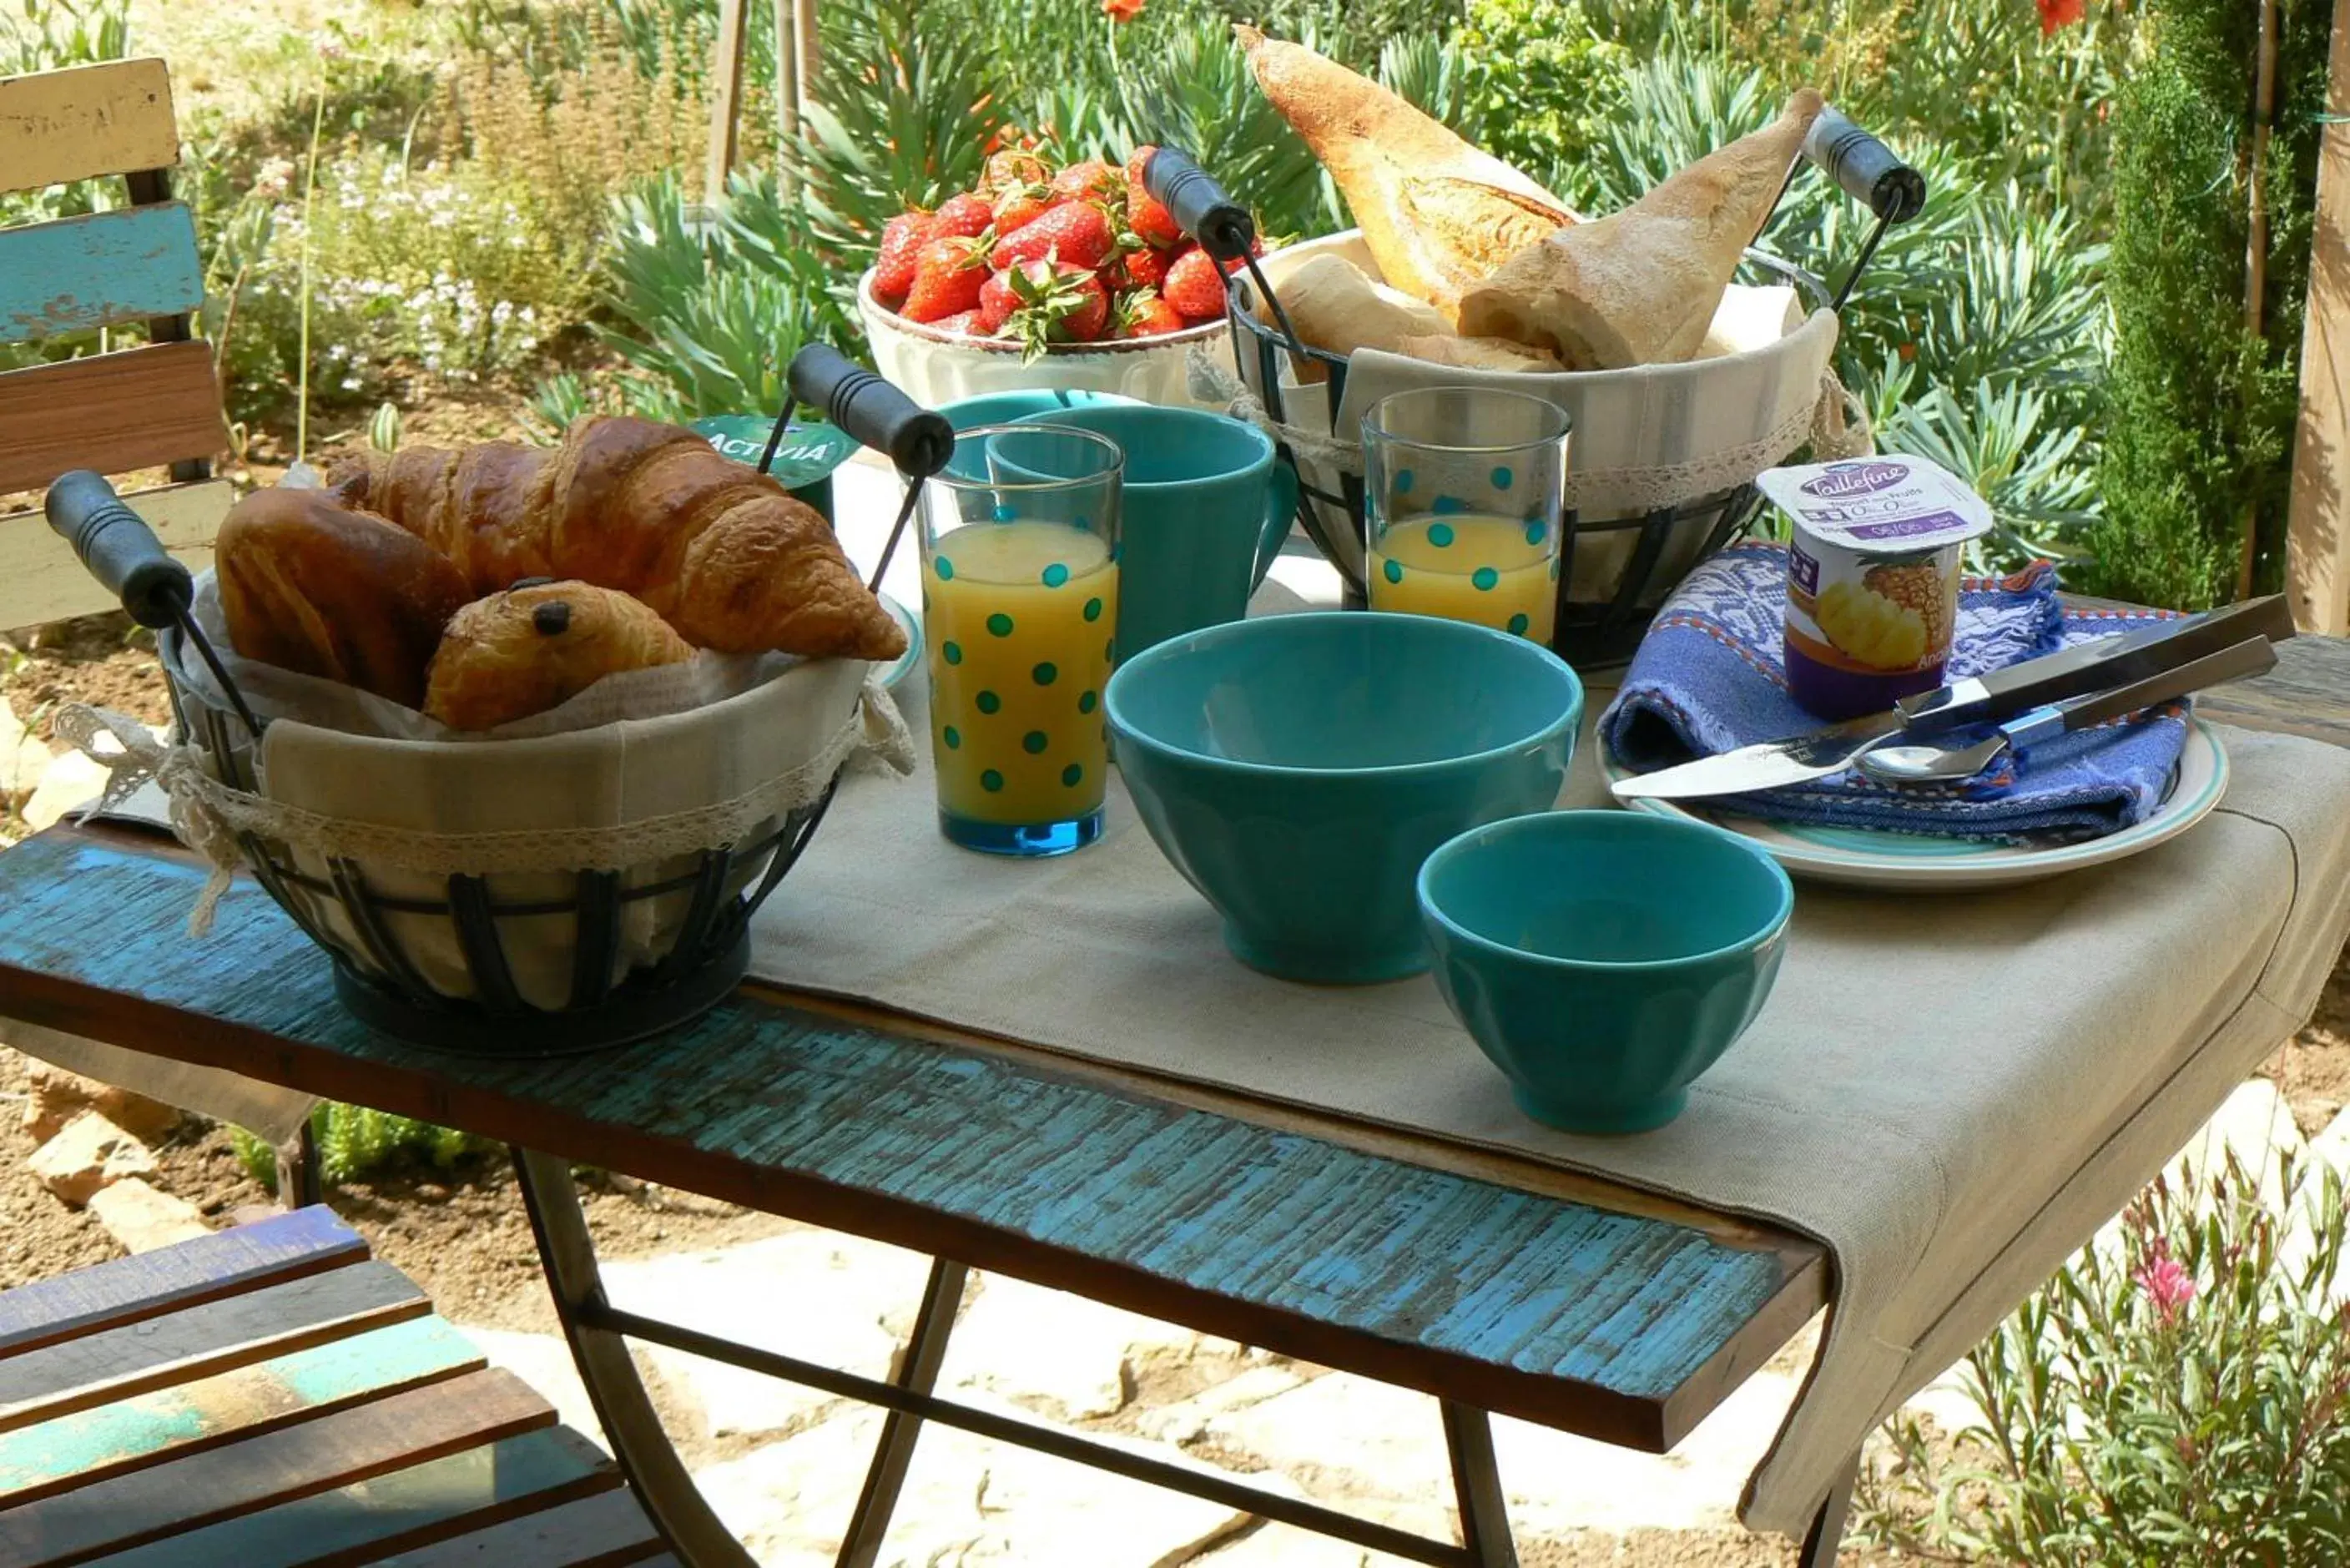 Continental breakfast in L' Escale Tranquille